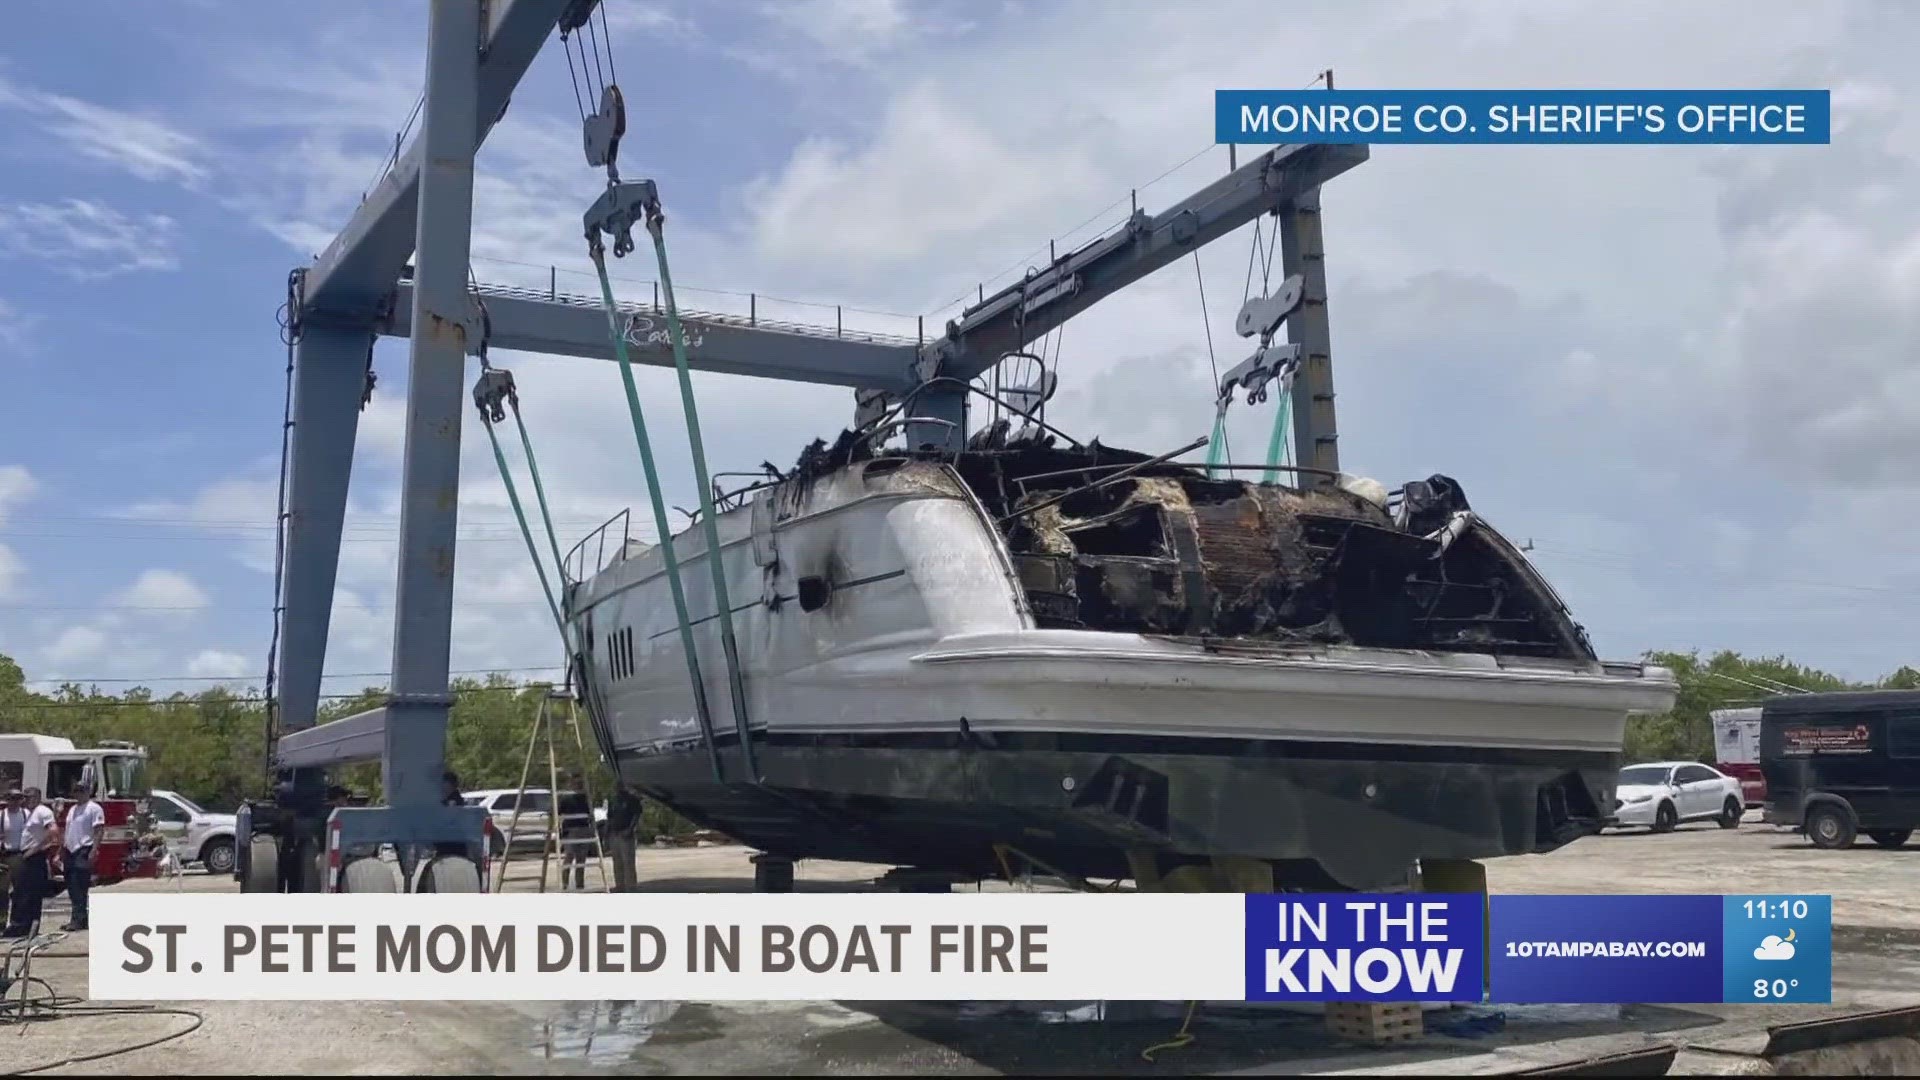 The woman was presumed dead on Wednesday after disappearing when the 70-foot Viking yacht she was on with her family caught fire.